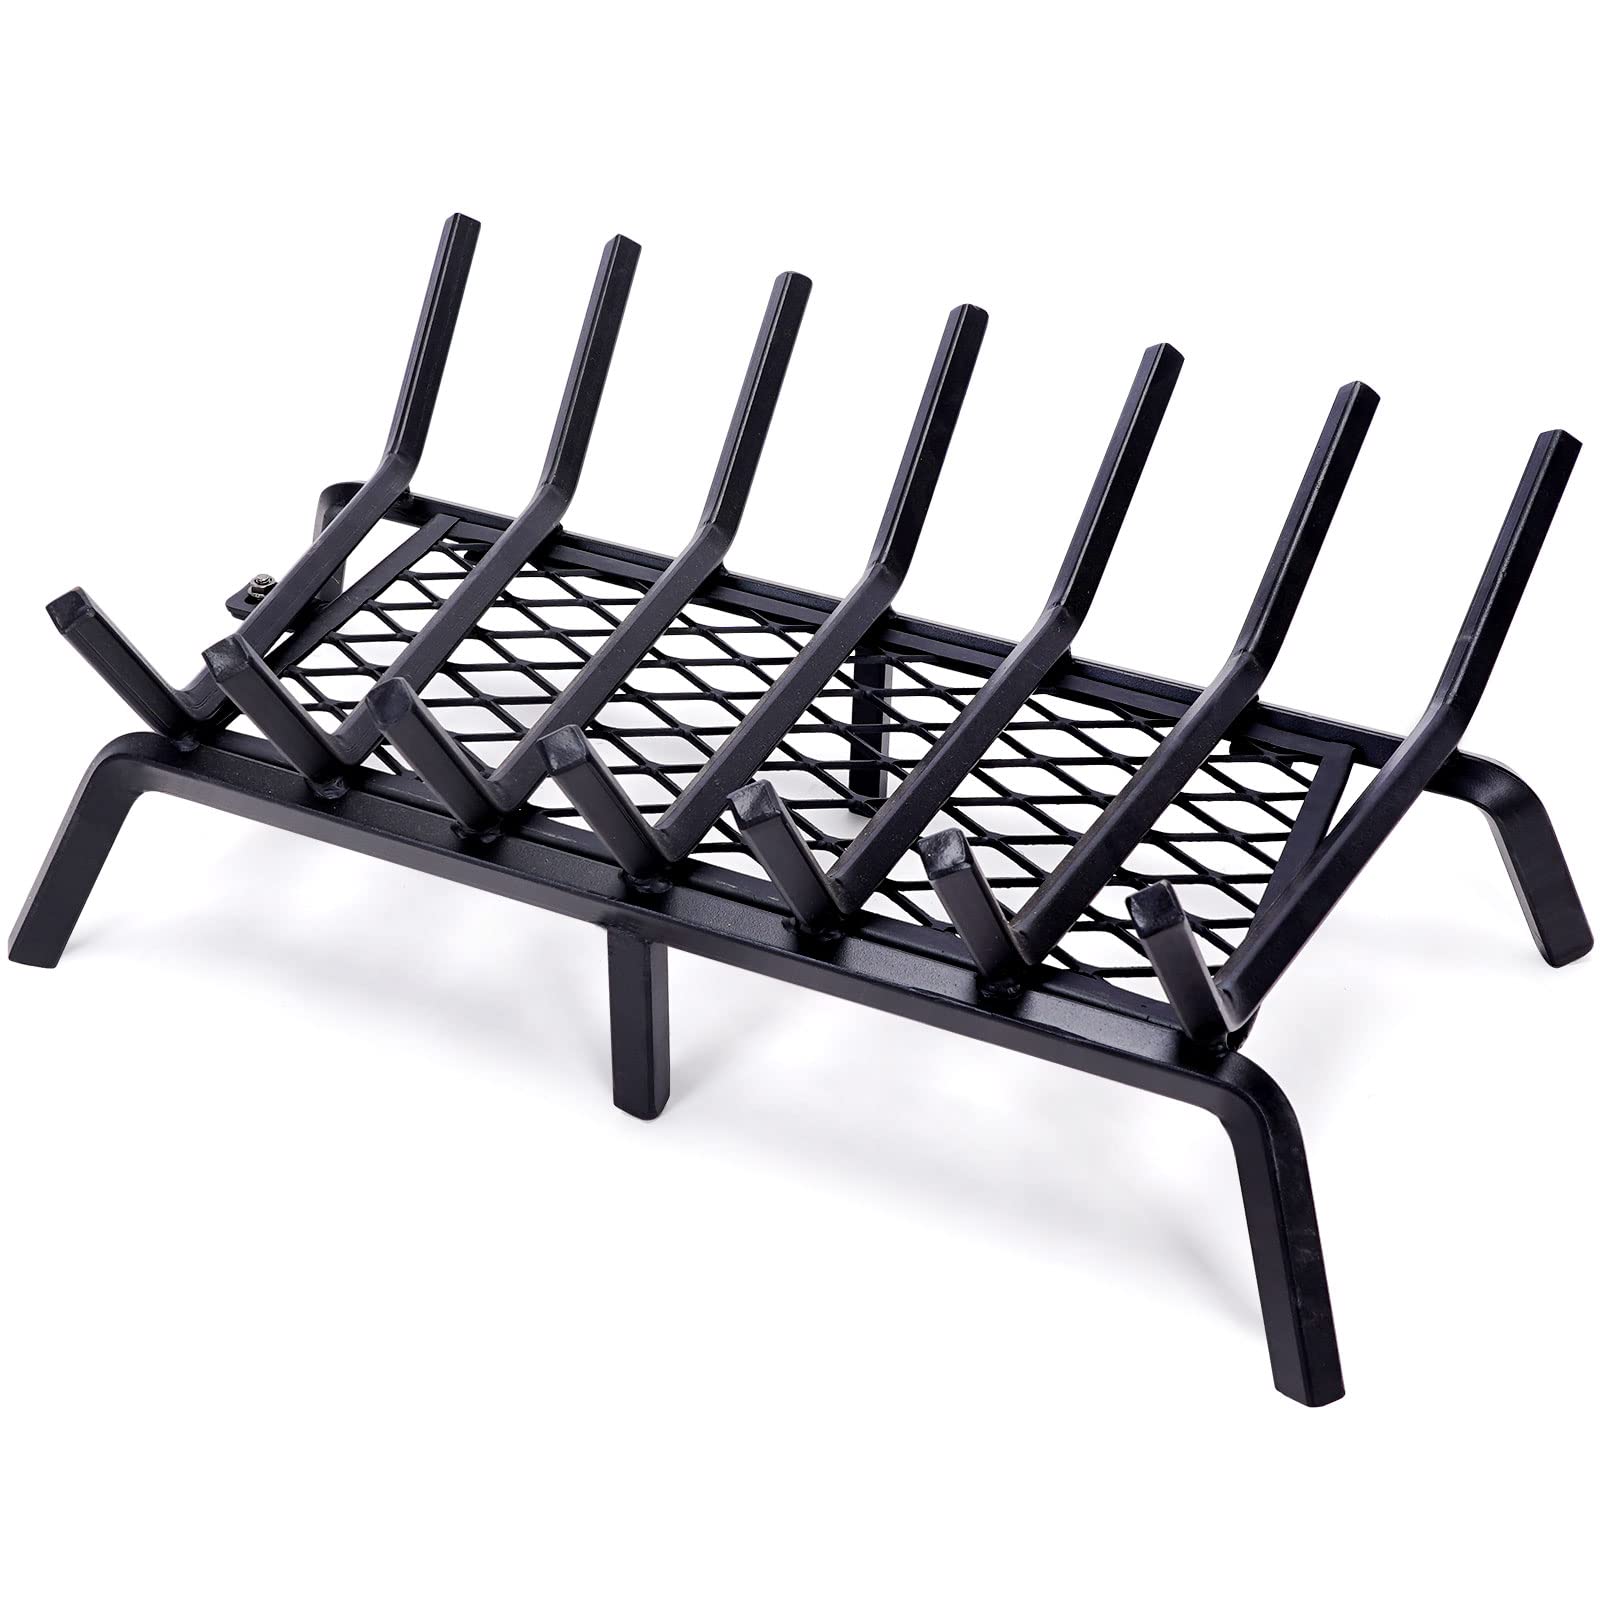 INNO STAGE Fireplace Grates with Gloves, Firewood Fire Wood Log Holder Rack 23.5 Inch Inside Wrought Cast Iron Grill Fireplace Log Grate for Outdoor Camping Cooking